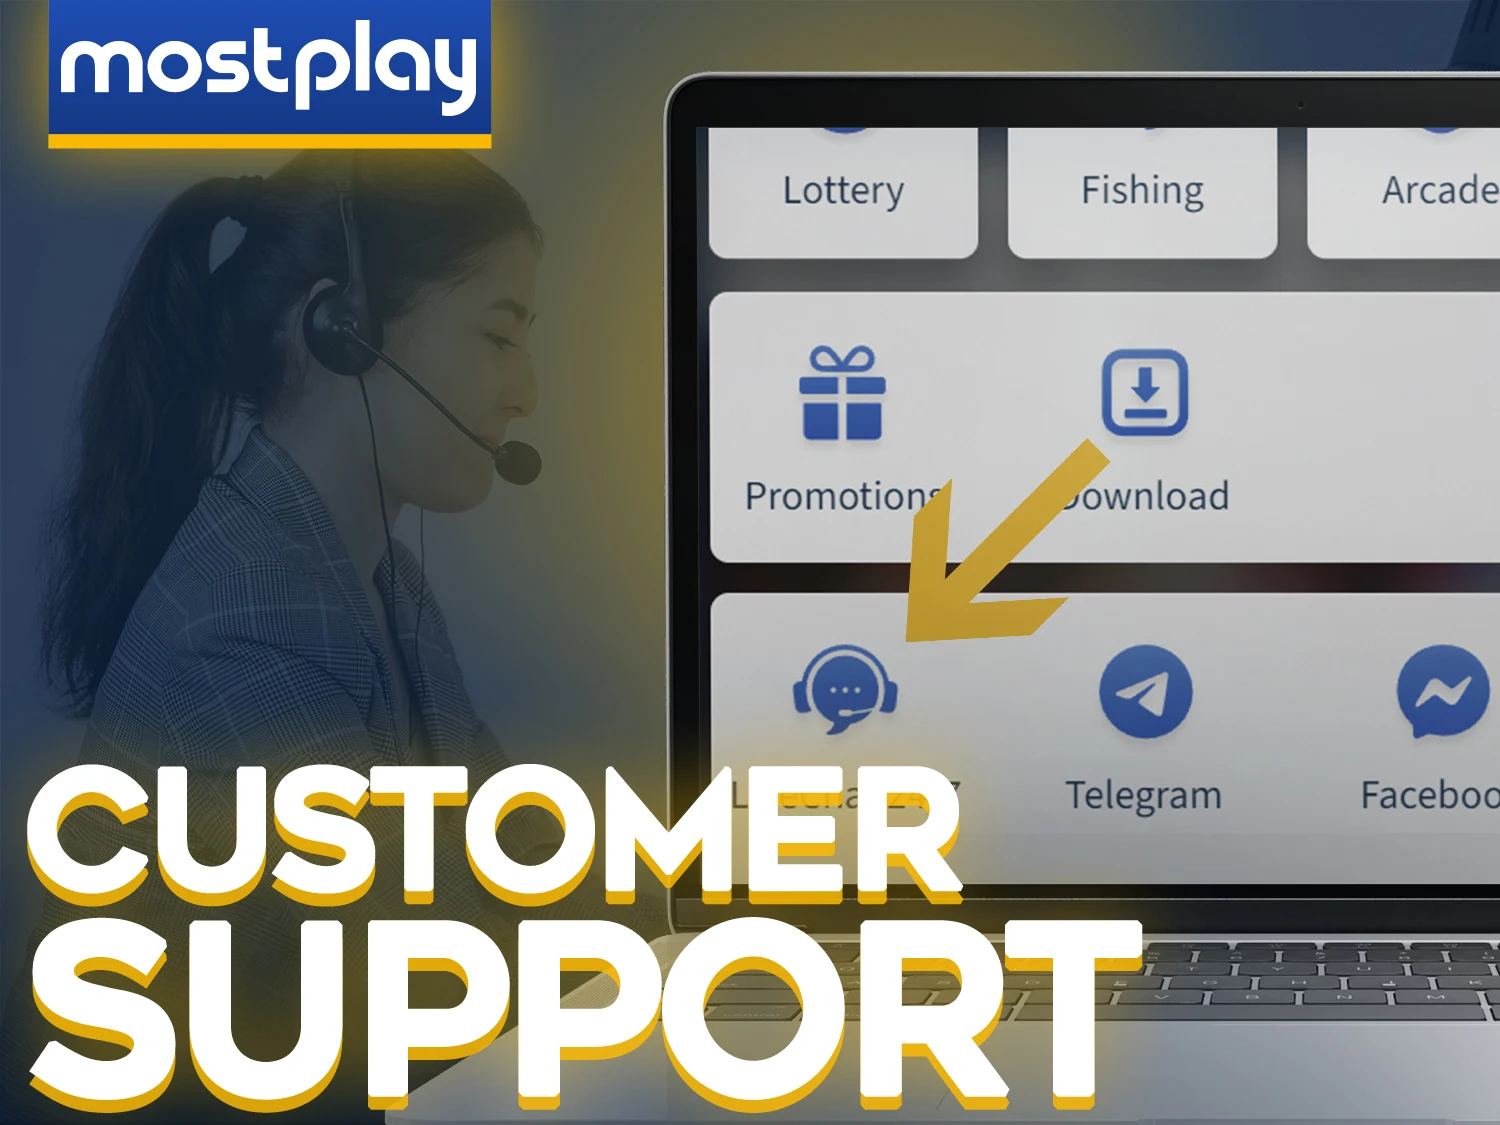 Ask any question to the Mostplay support.